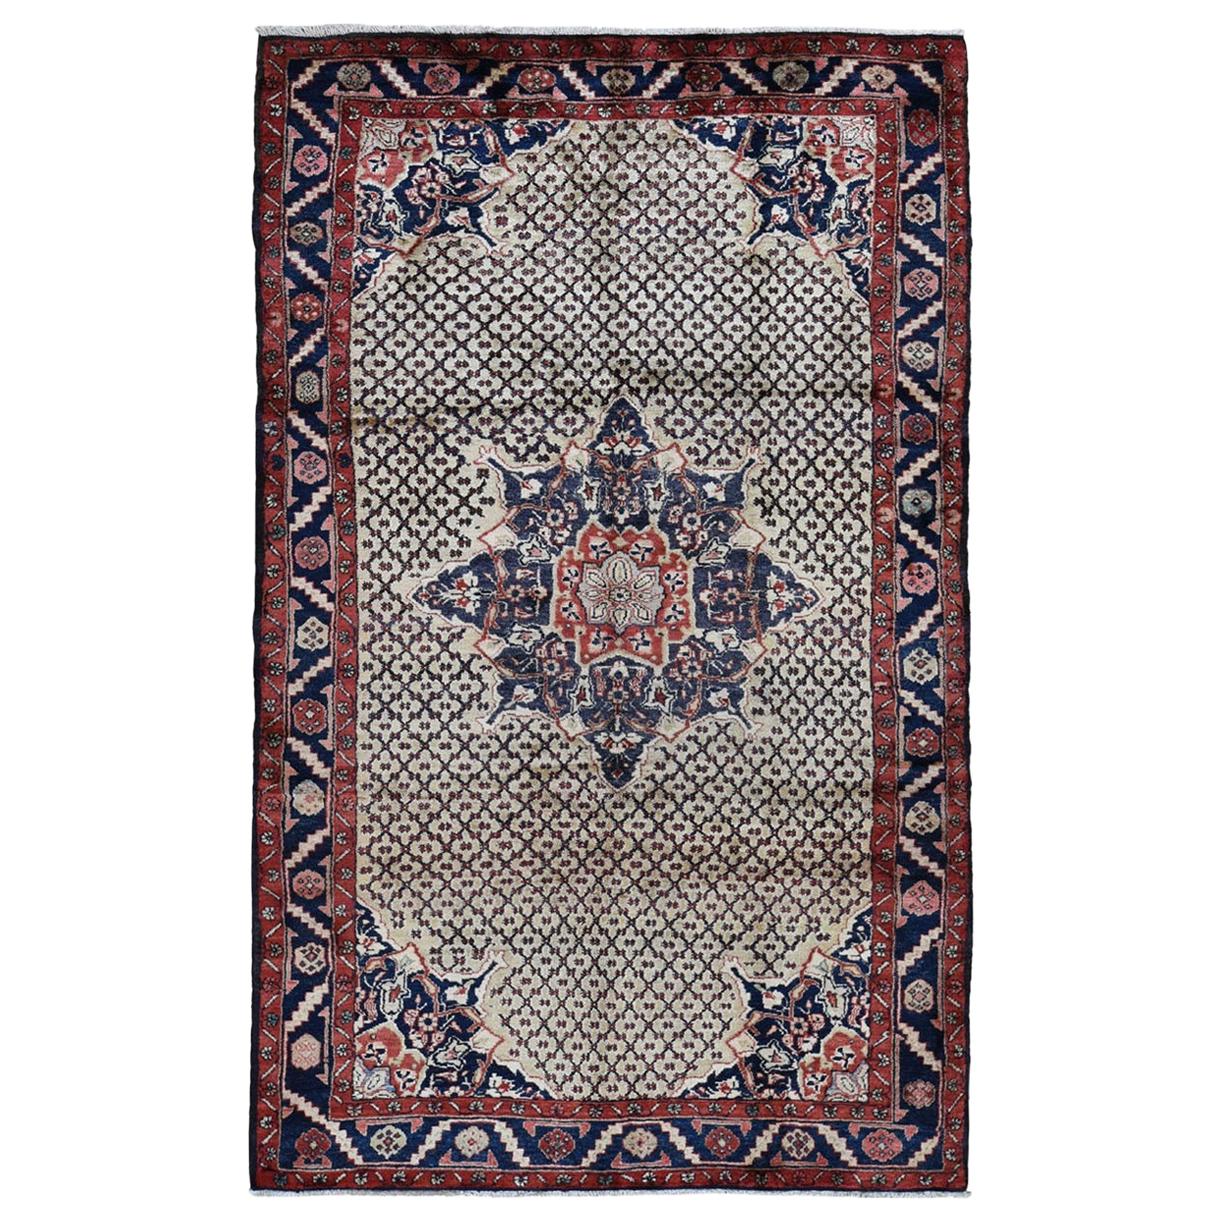 Gallery Size Vintage Persian Hamadan Camel Hair Pure Wool Hand Knotted Rug